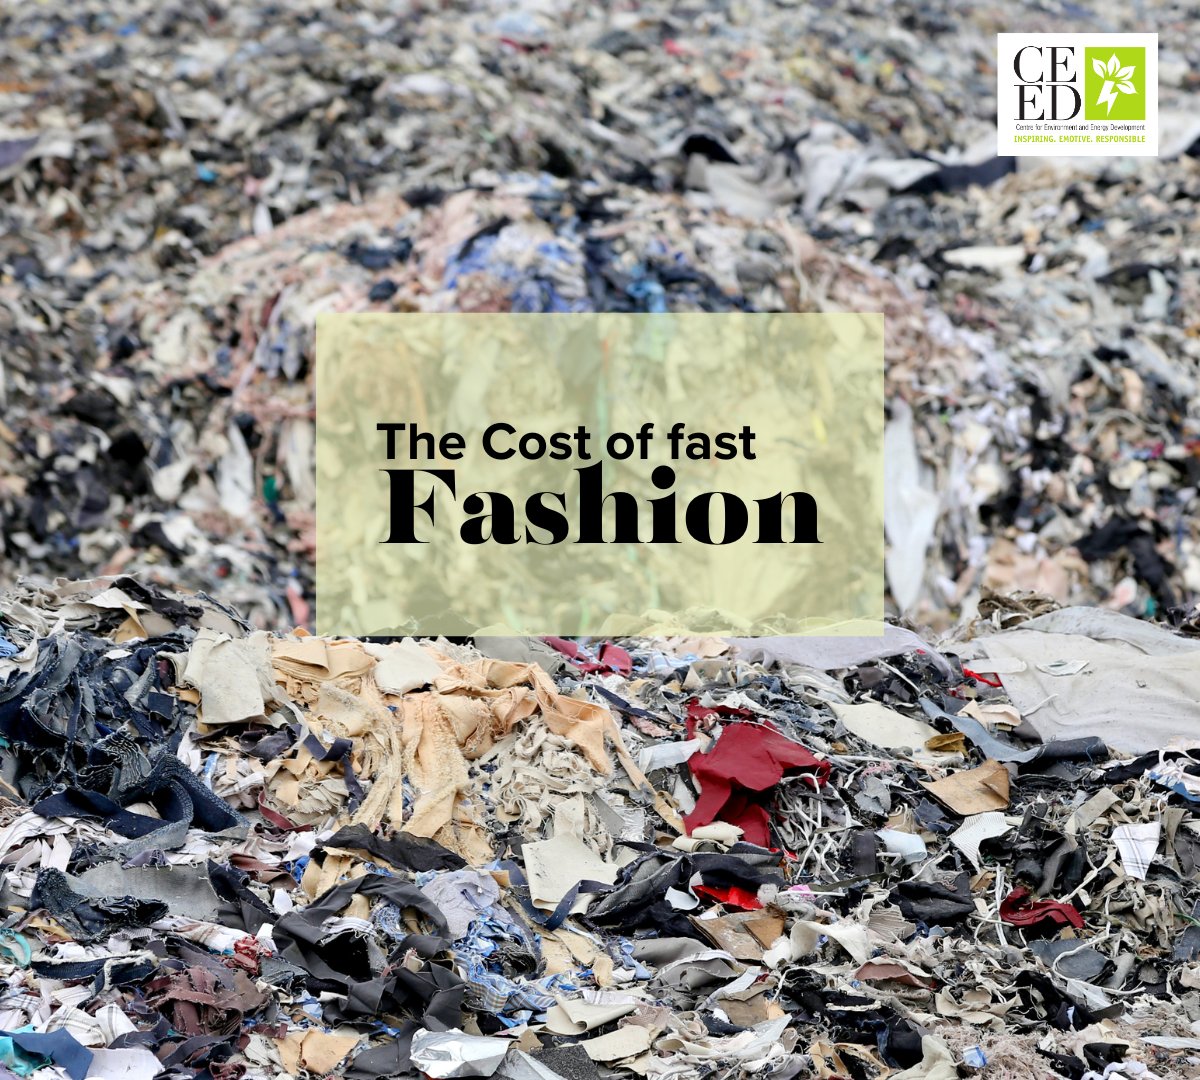 Fast fashion waste stems from the rapid turnover of cheap clothing, causing environmental harm and social issues. Overconsumption leads to excessive waste generation, to tackle this, the industry needs sustainable practices, and consumer education on conscious buying.